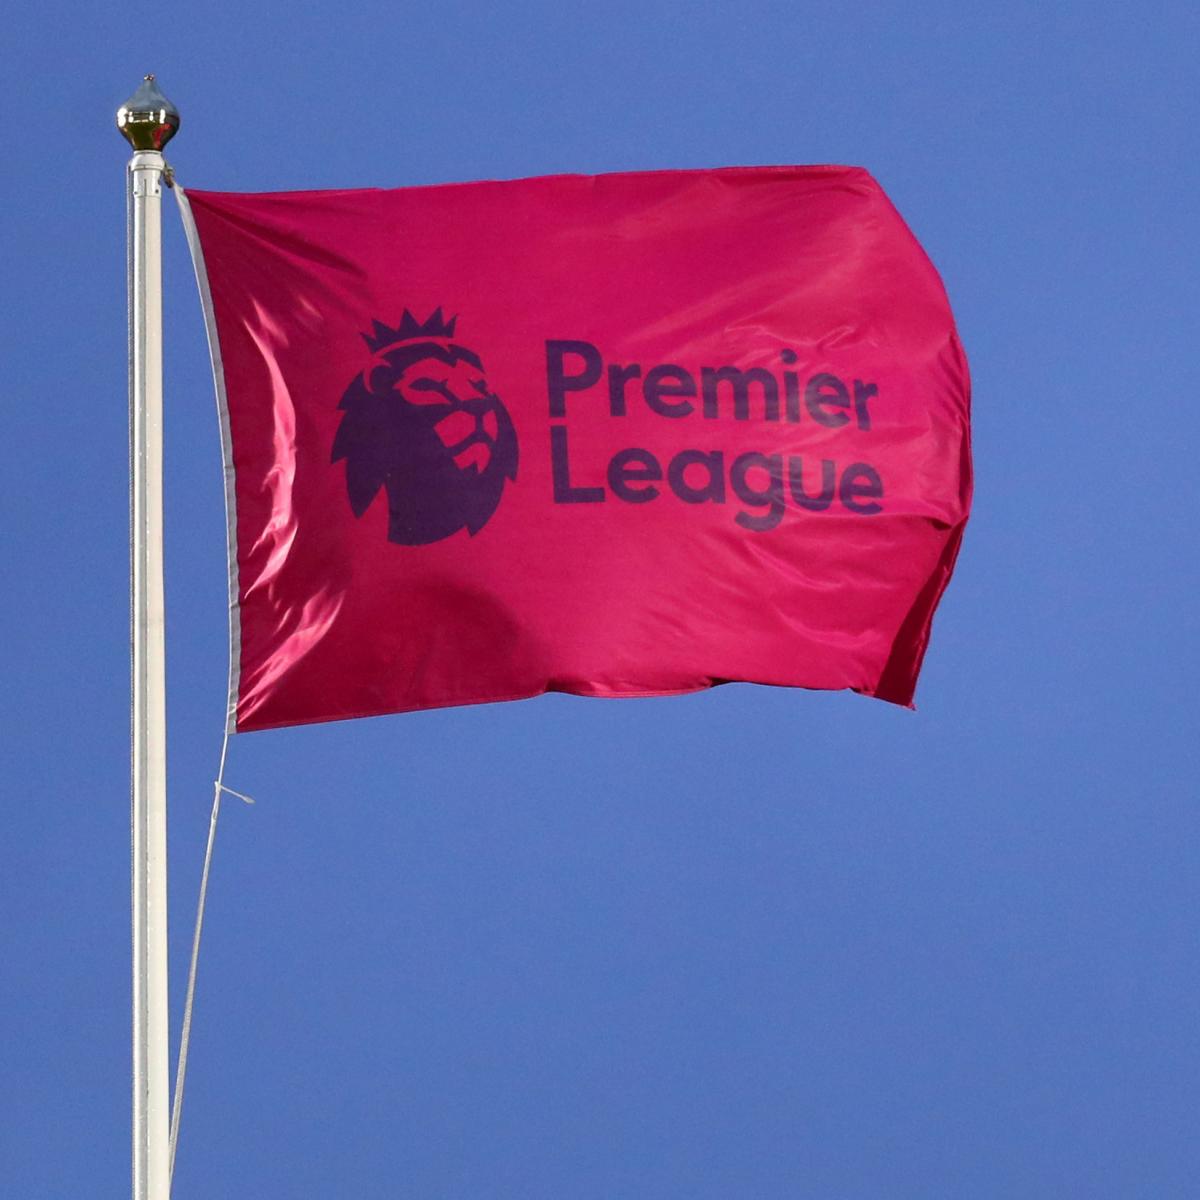 UK Government: EPL Allowed to Restart in June Without Fans Amid COVID-19